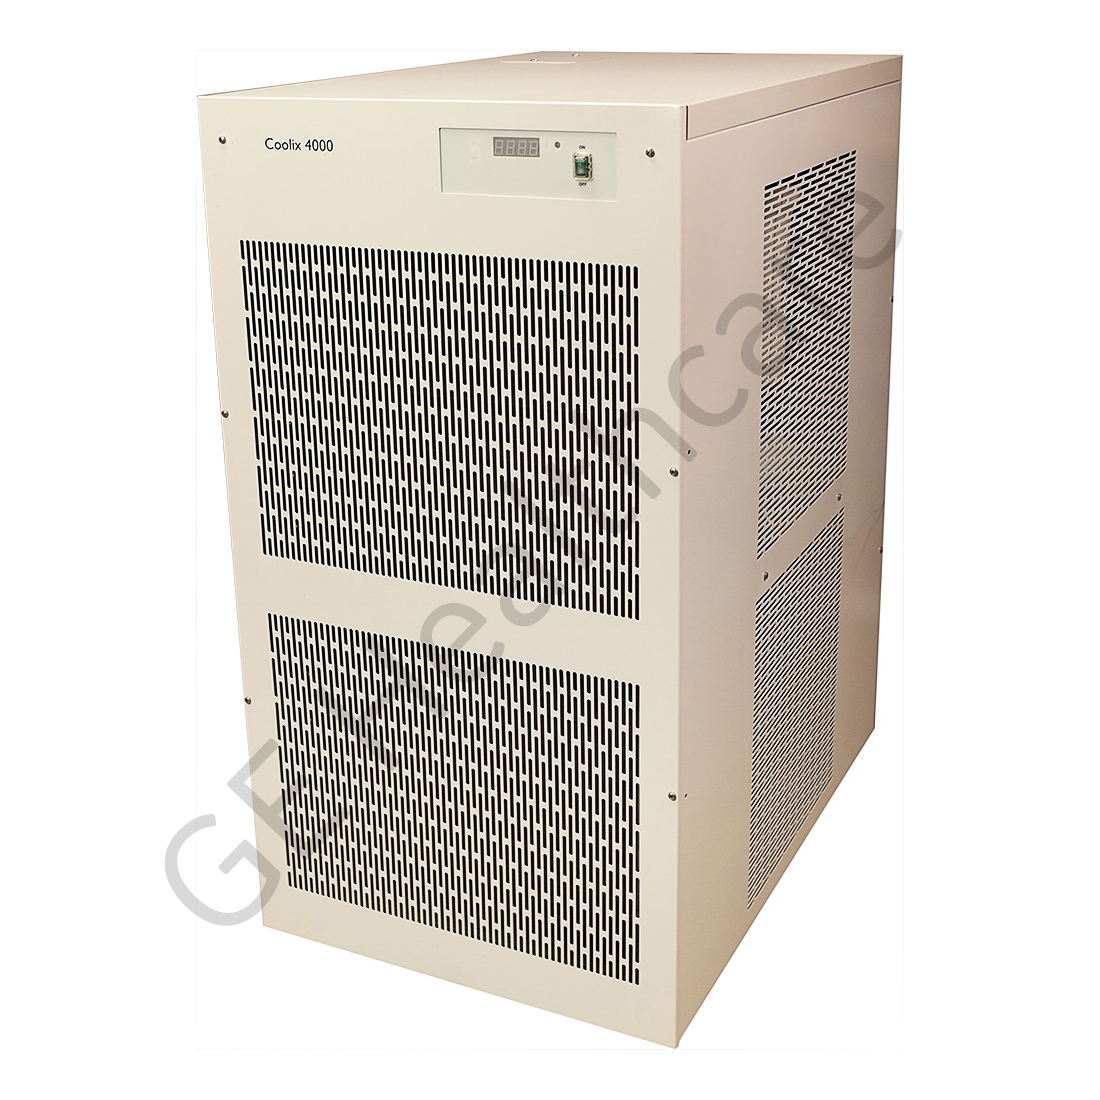 COOLIX 4000 CHILLER FOR PERFORMIX 160 VASCULAR X-Ray TUBE UNIT WITH RS232 - no capacitors